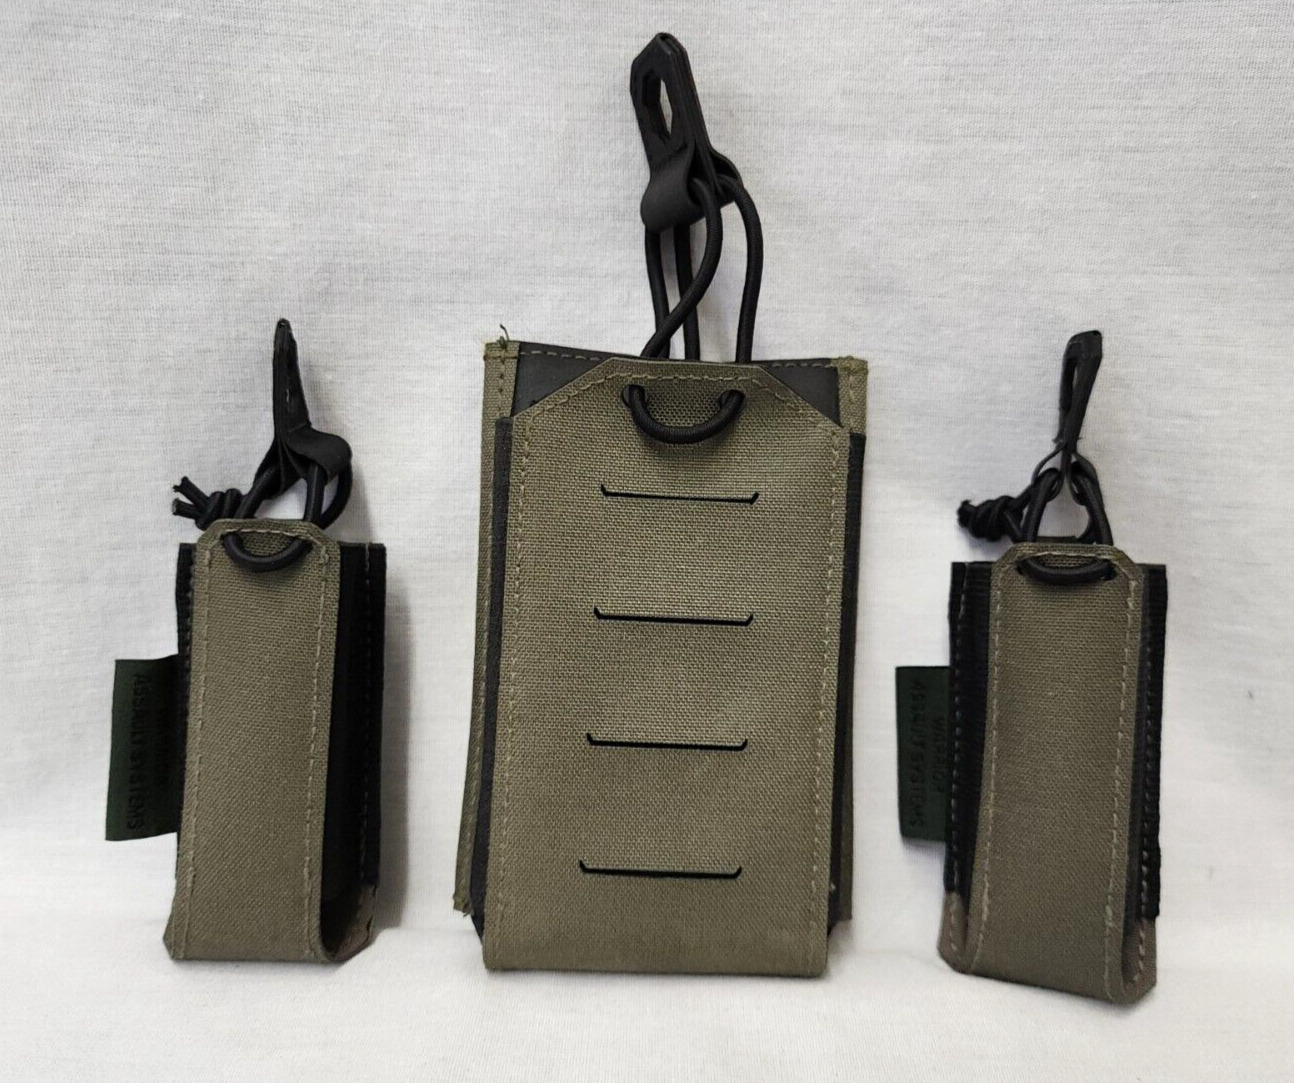 Warrior Assault Systems Pouch OD Green Lot of 3 Cag Sof Devgru Seal